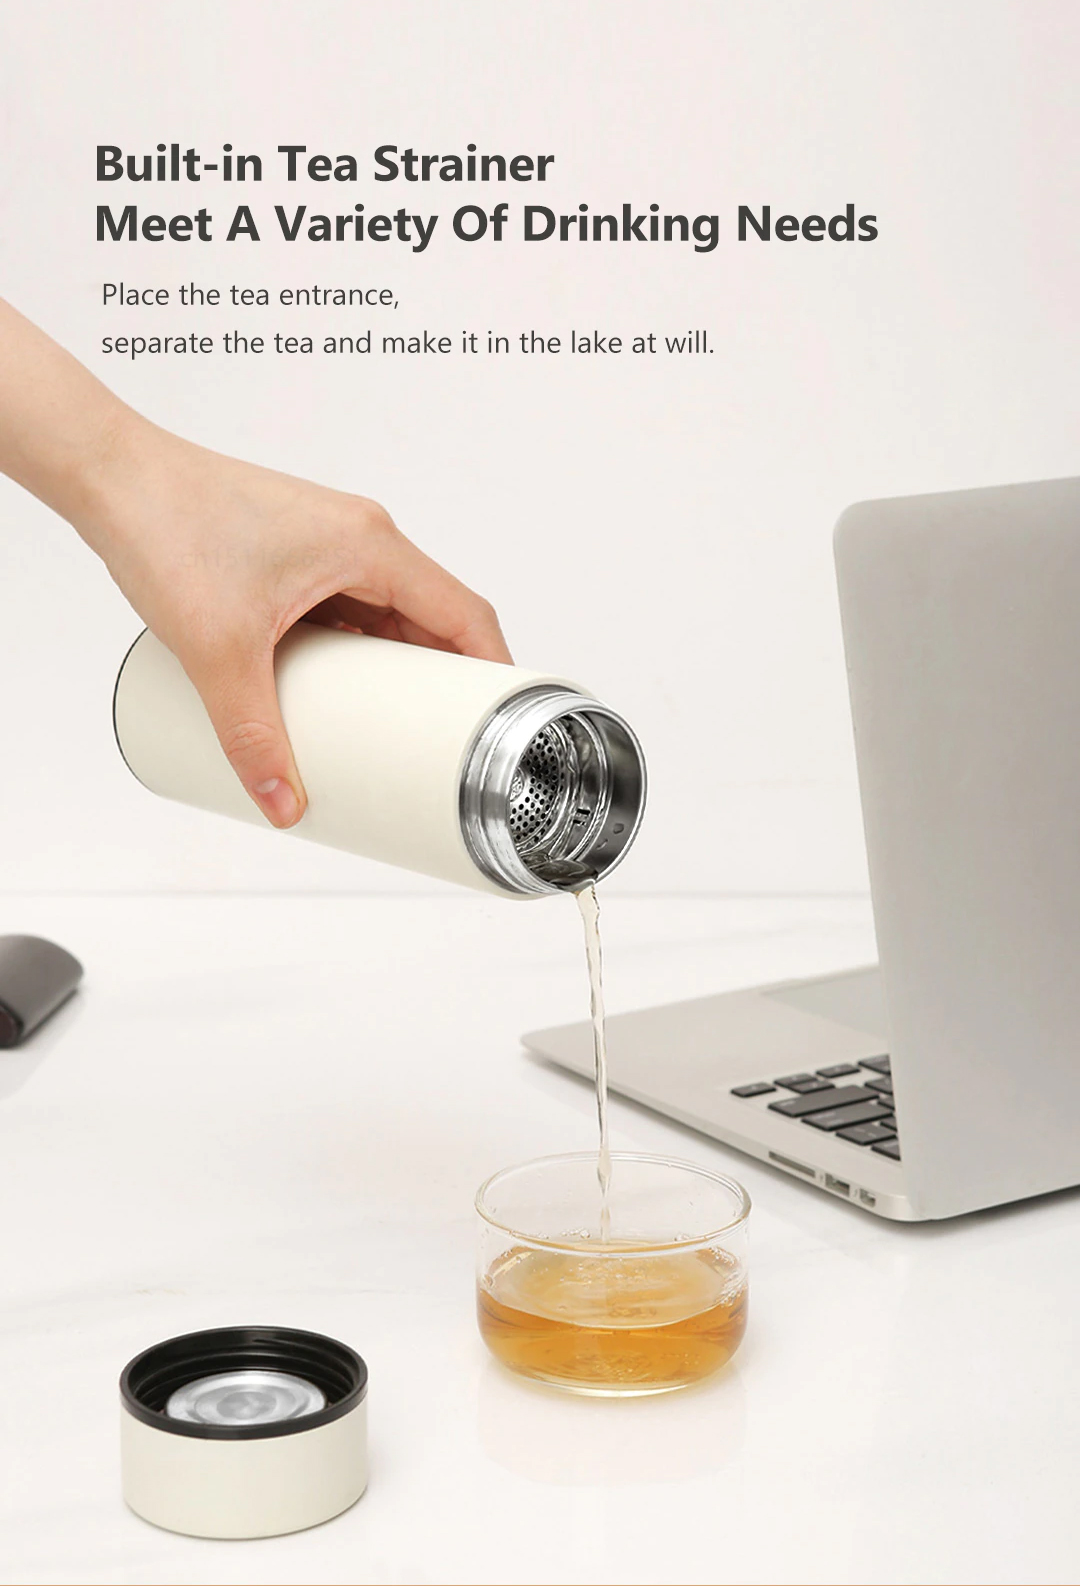 Built-in Tea Strainer Meet A Variety Of Drinking Needs